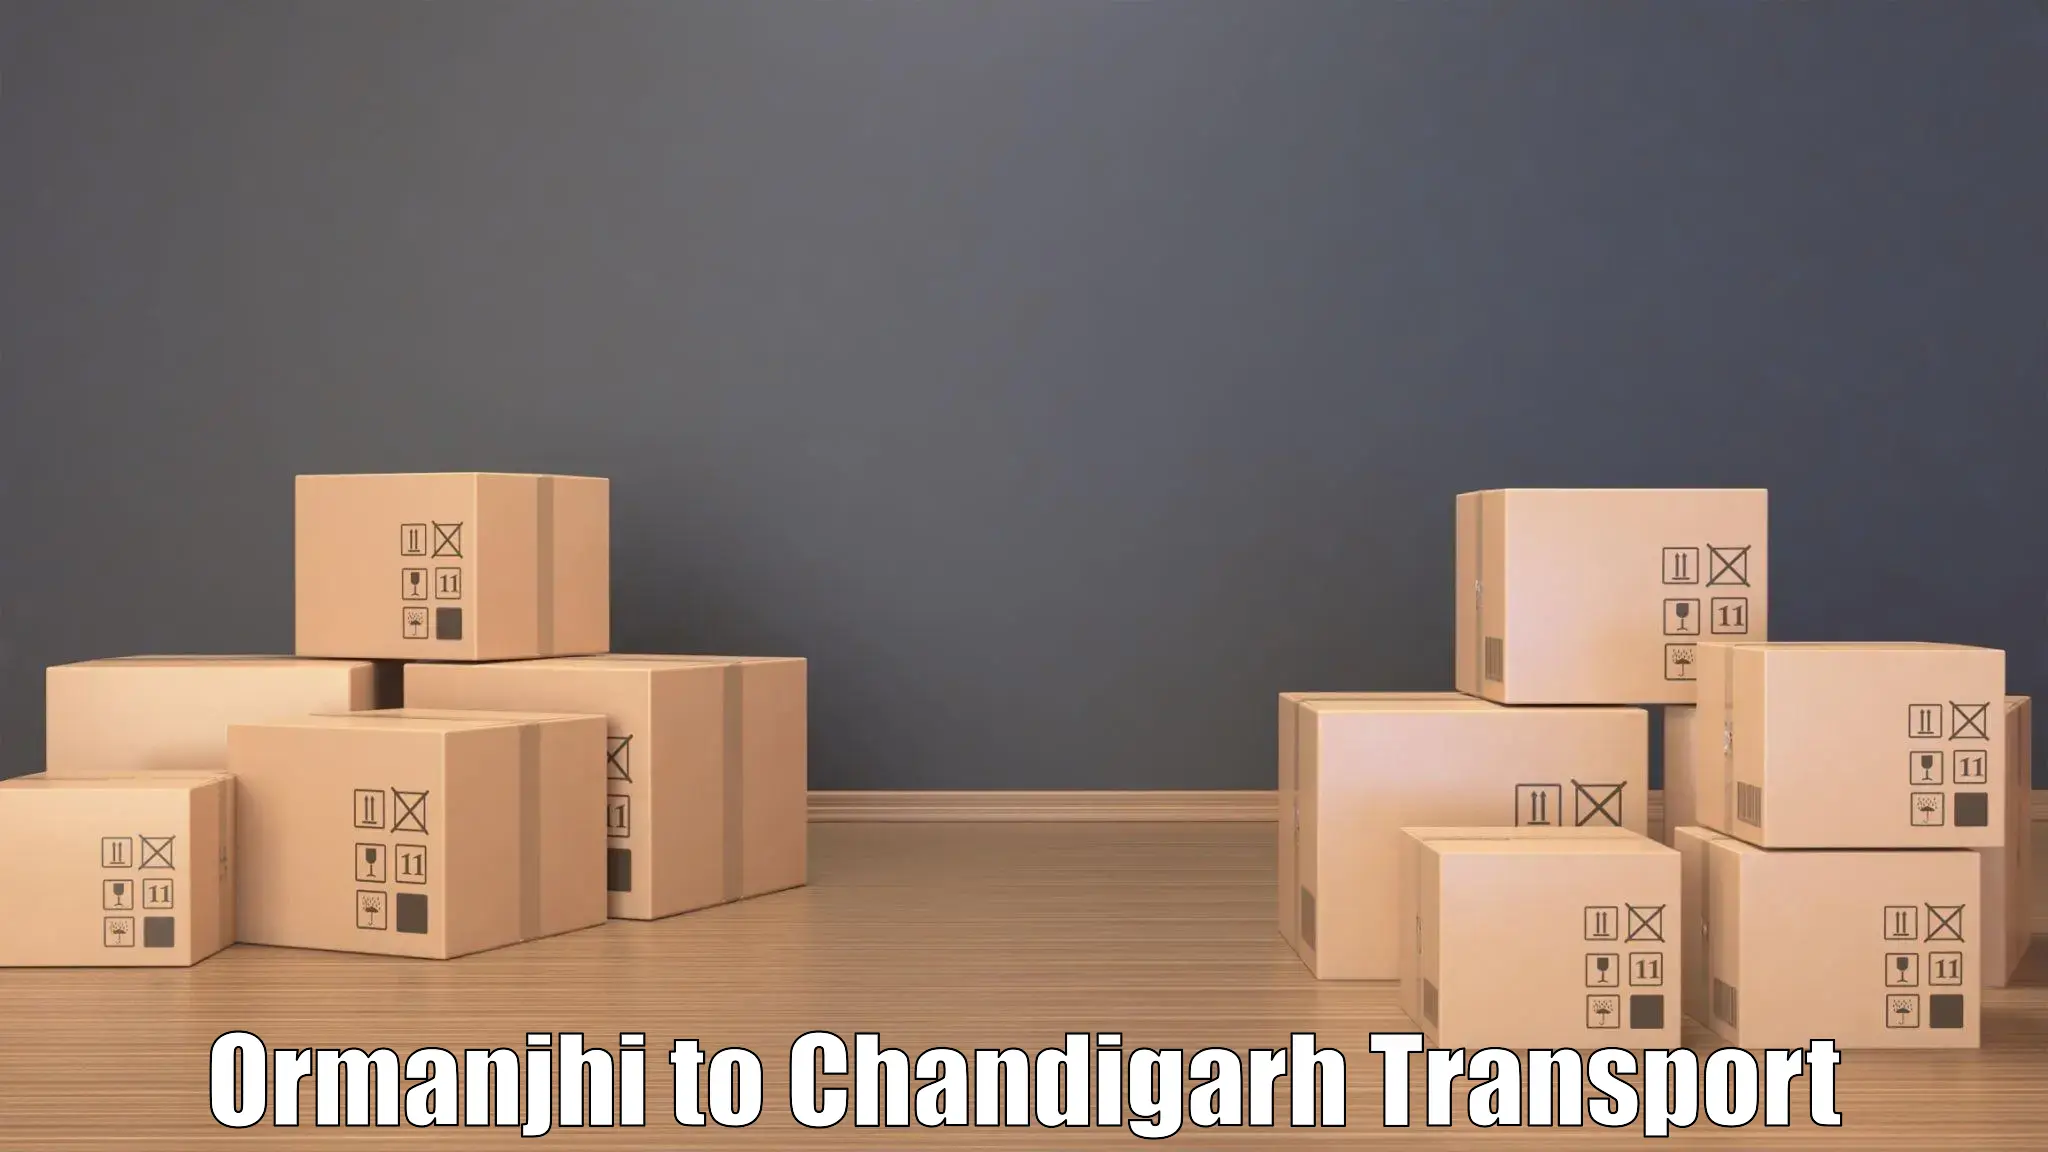 Transport in sharing in Ormanjhi to Chandigarh